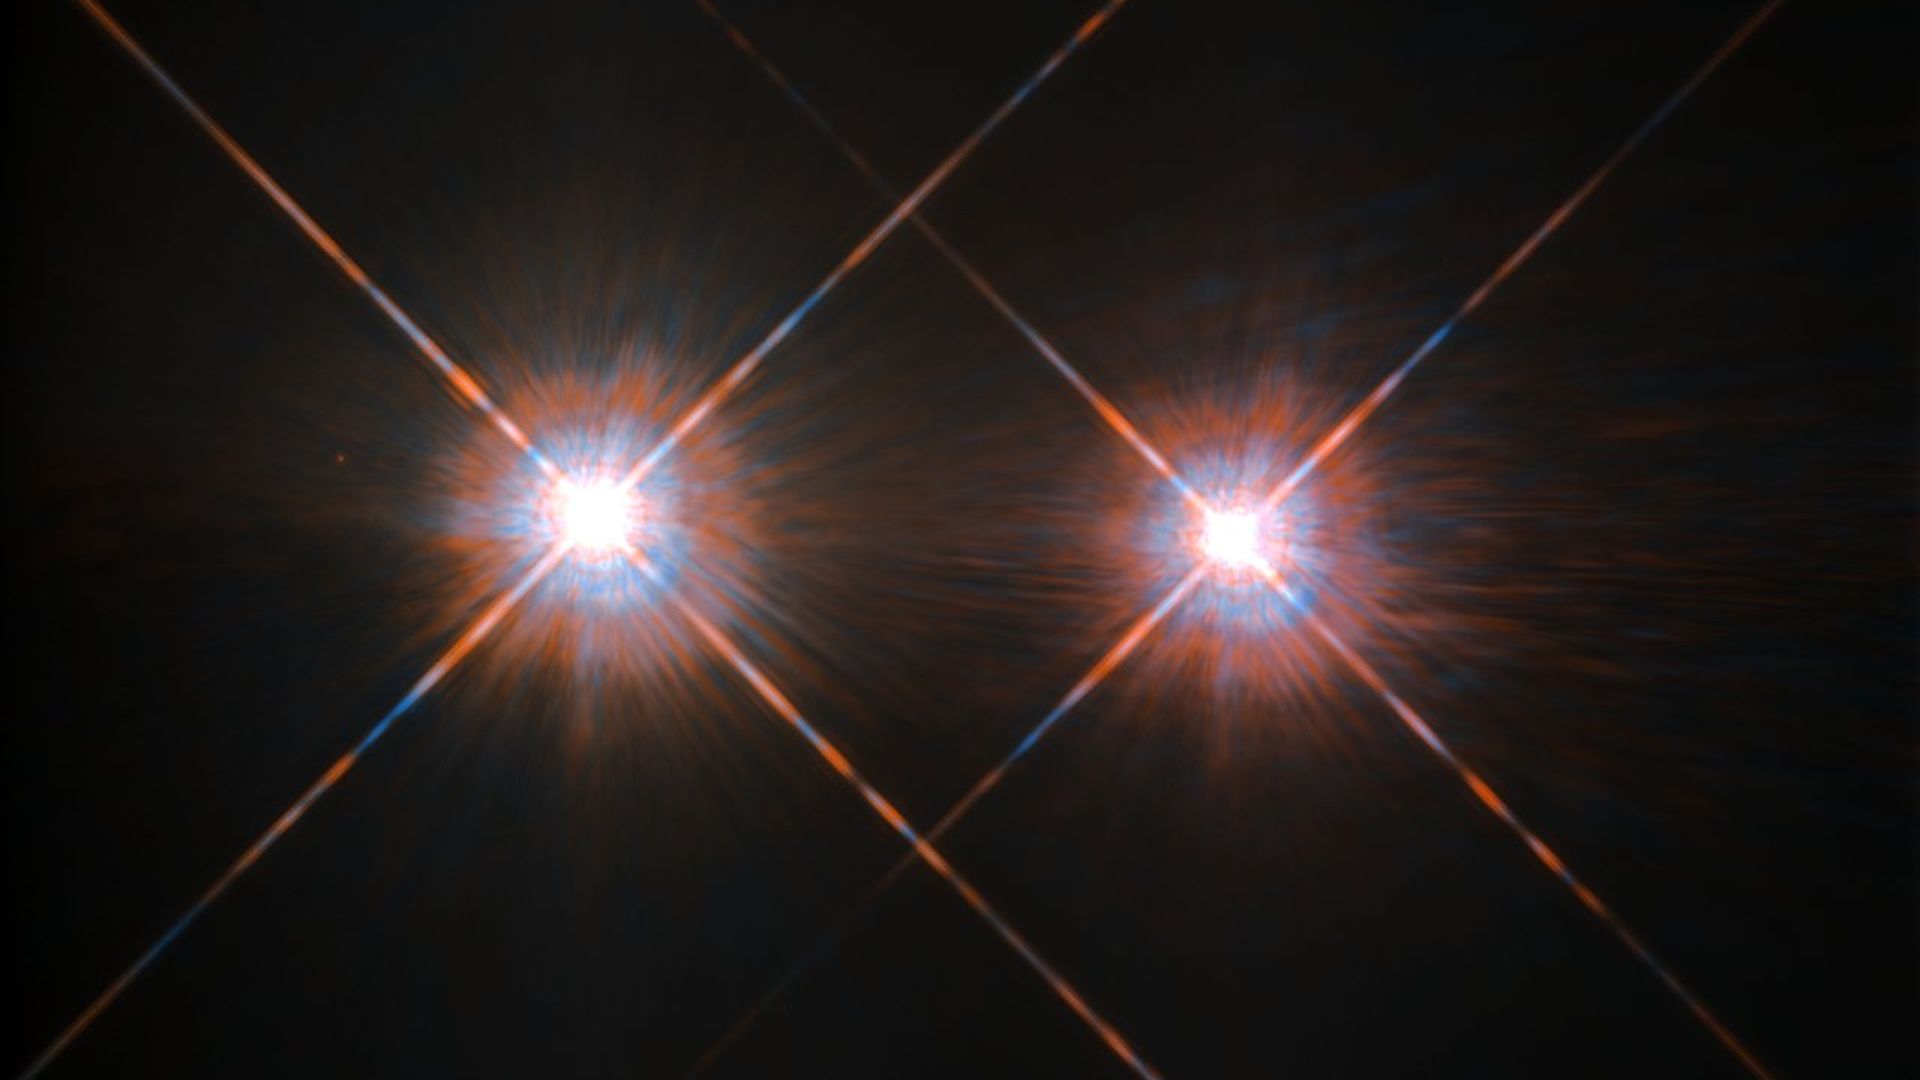 Two bright twin stars shine, with rays shooting out of them against the blackness of space